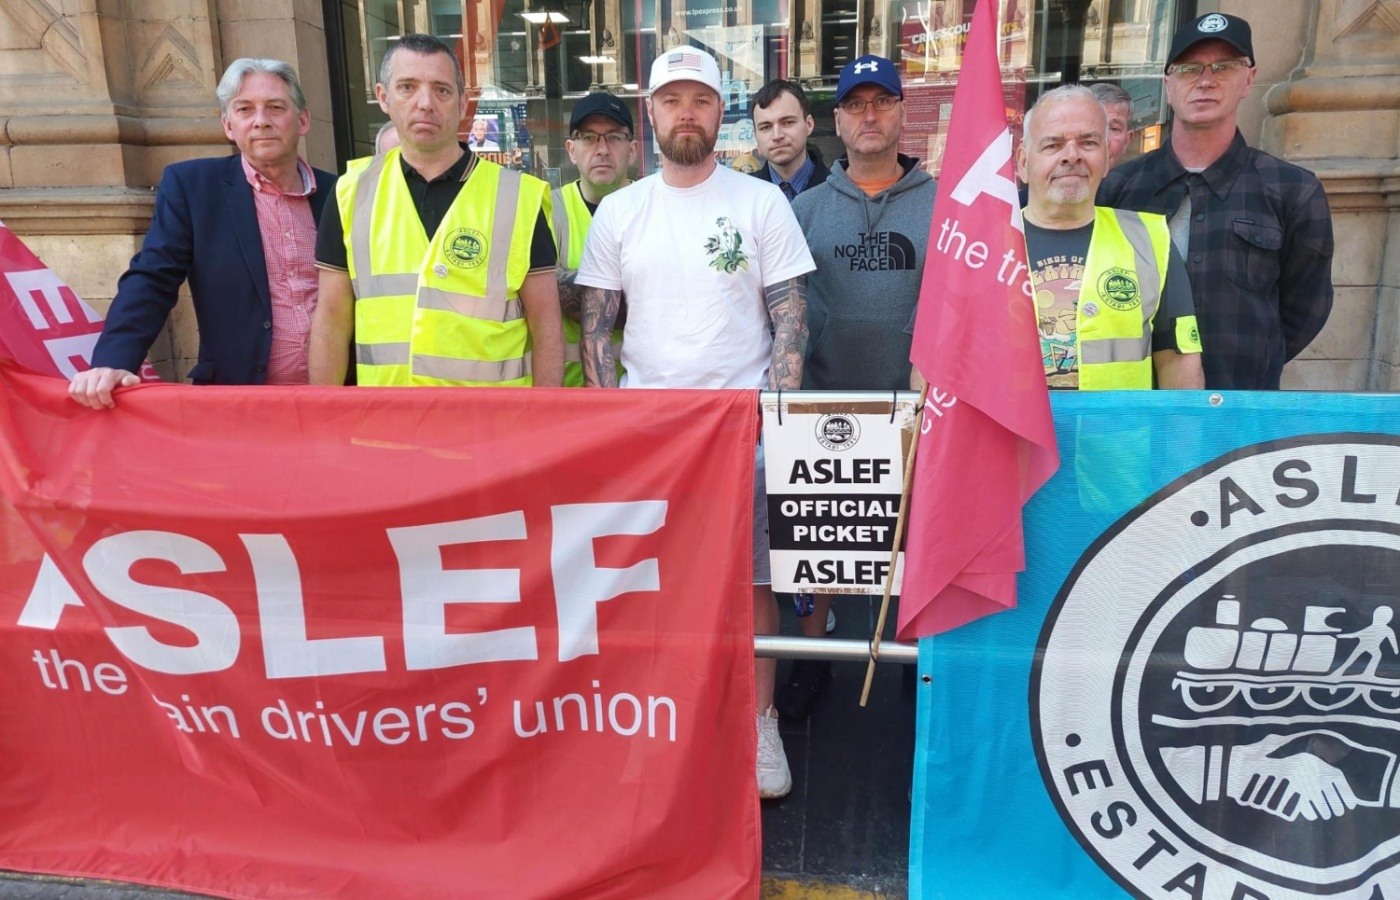 Members of Aslef union outside Glasgow's Central Station.